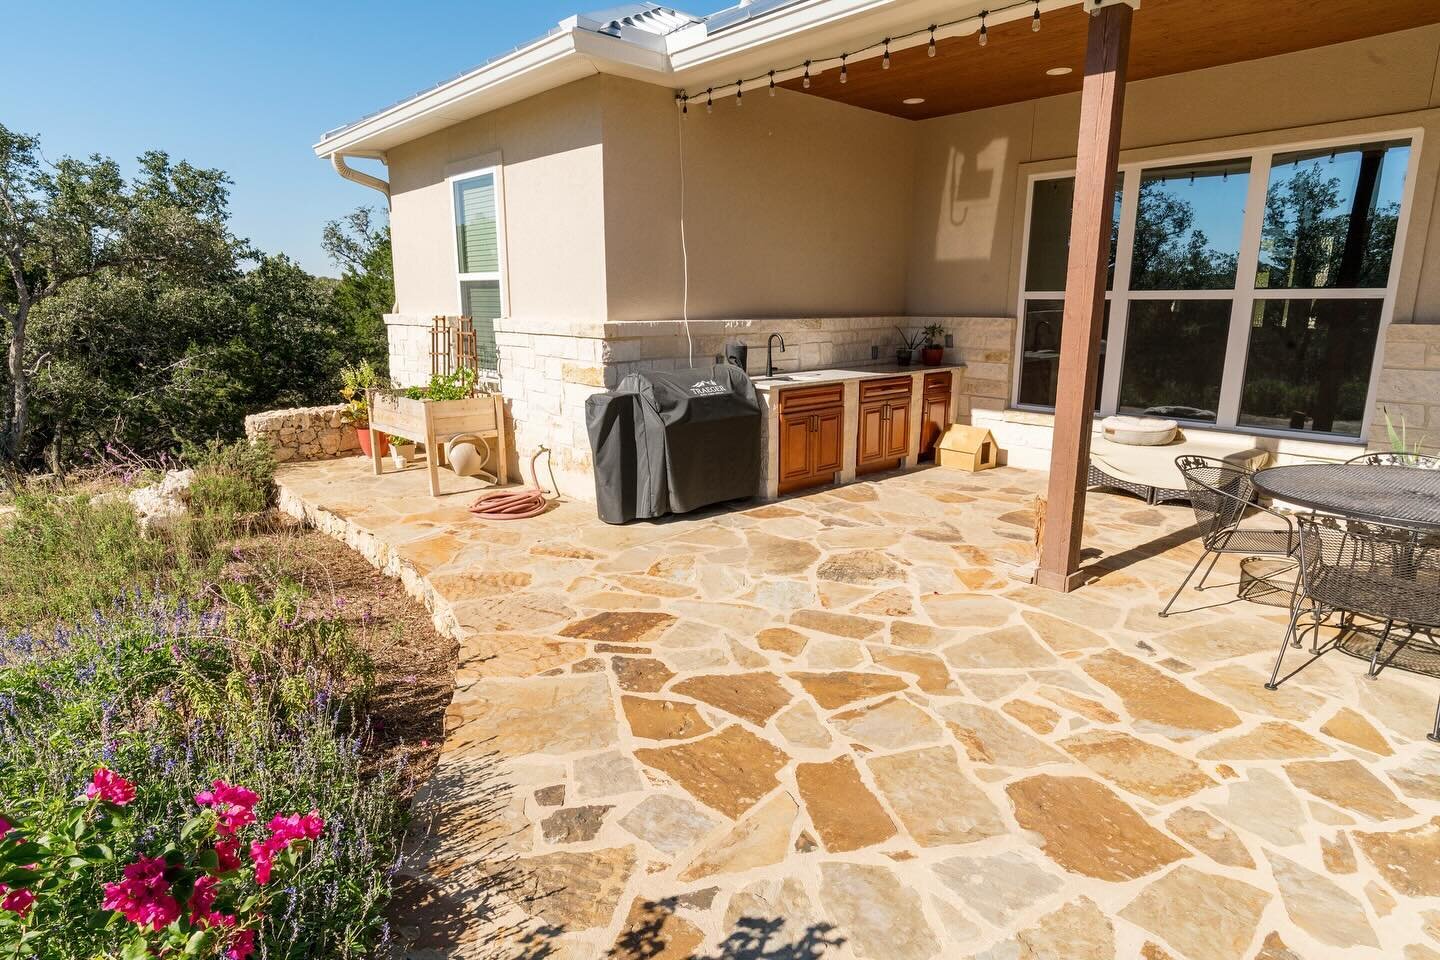 Check out this outdoor living space! Let us turnkey everything once you step out the door!

#landscaping #NewBraunfelslandscaping #Bulverdelandscaping #SpringBranchlandscaping #TXlandscaping #Austinlandscaping #outdoorbuilds #txhillcountry #hillcount